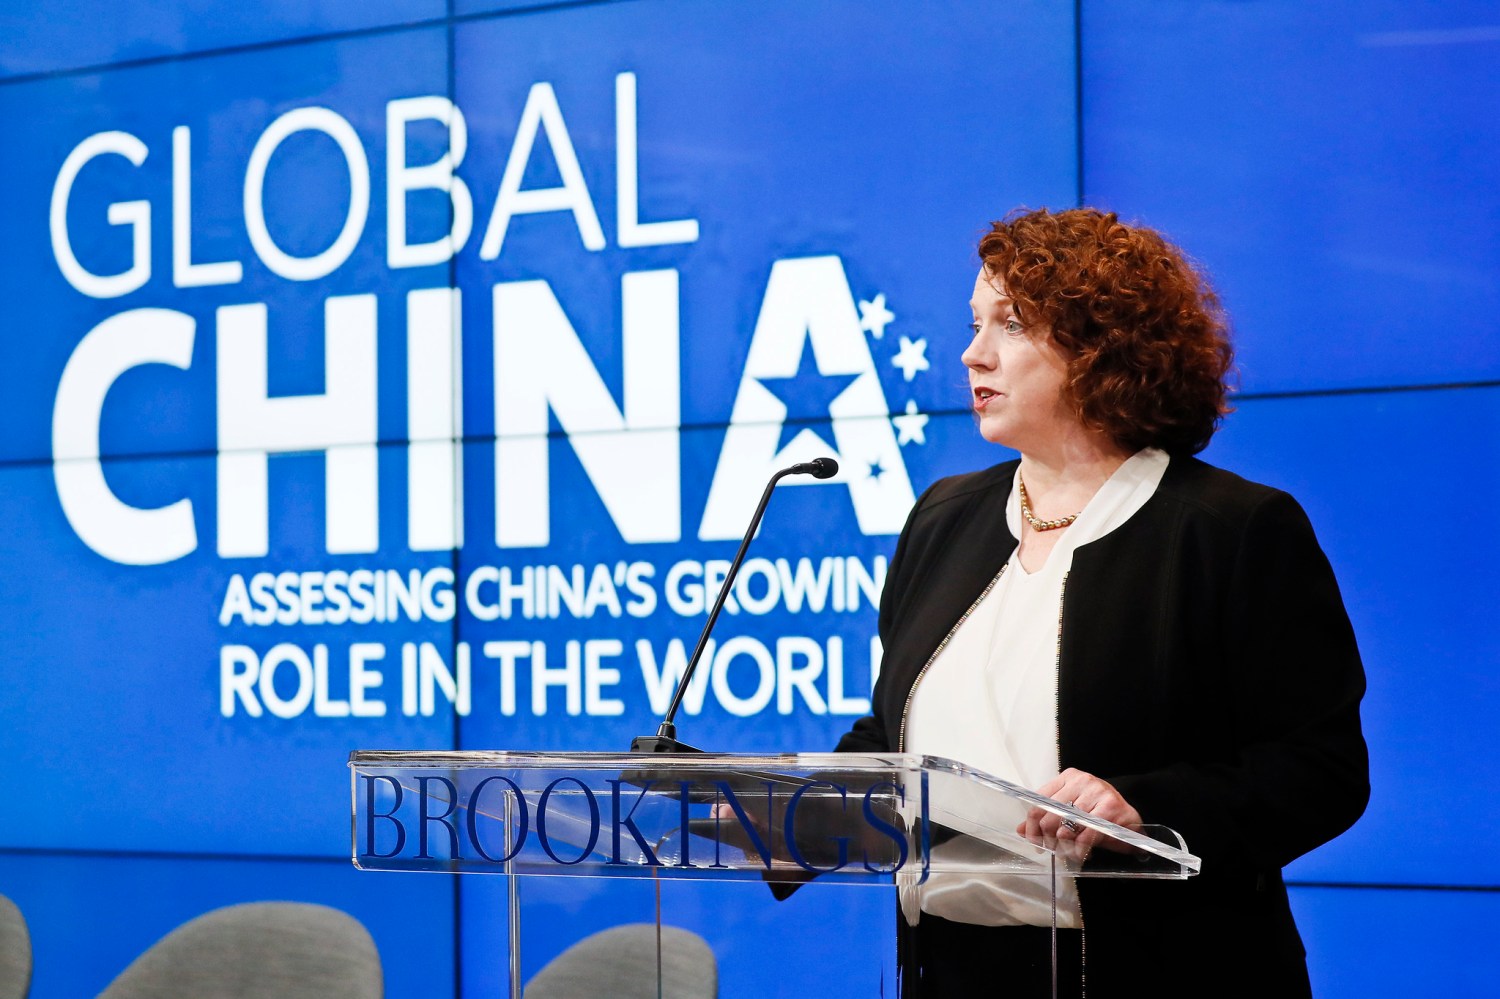 Vice president and director of Foreign Policy at Brookings, Suzanne Maloney, gives opening remarks before a Global China panel discussion at Brookings.